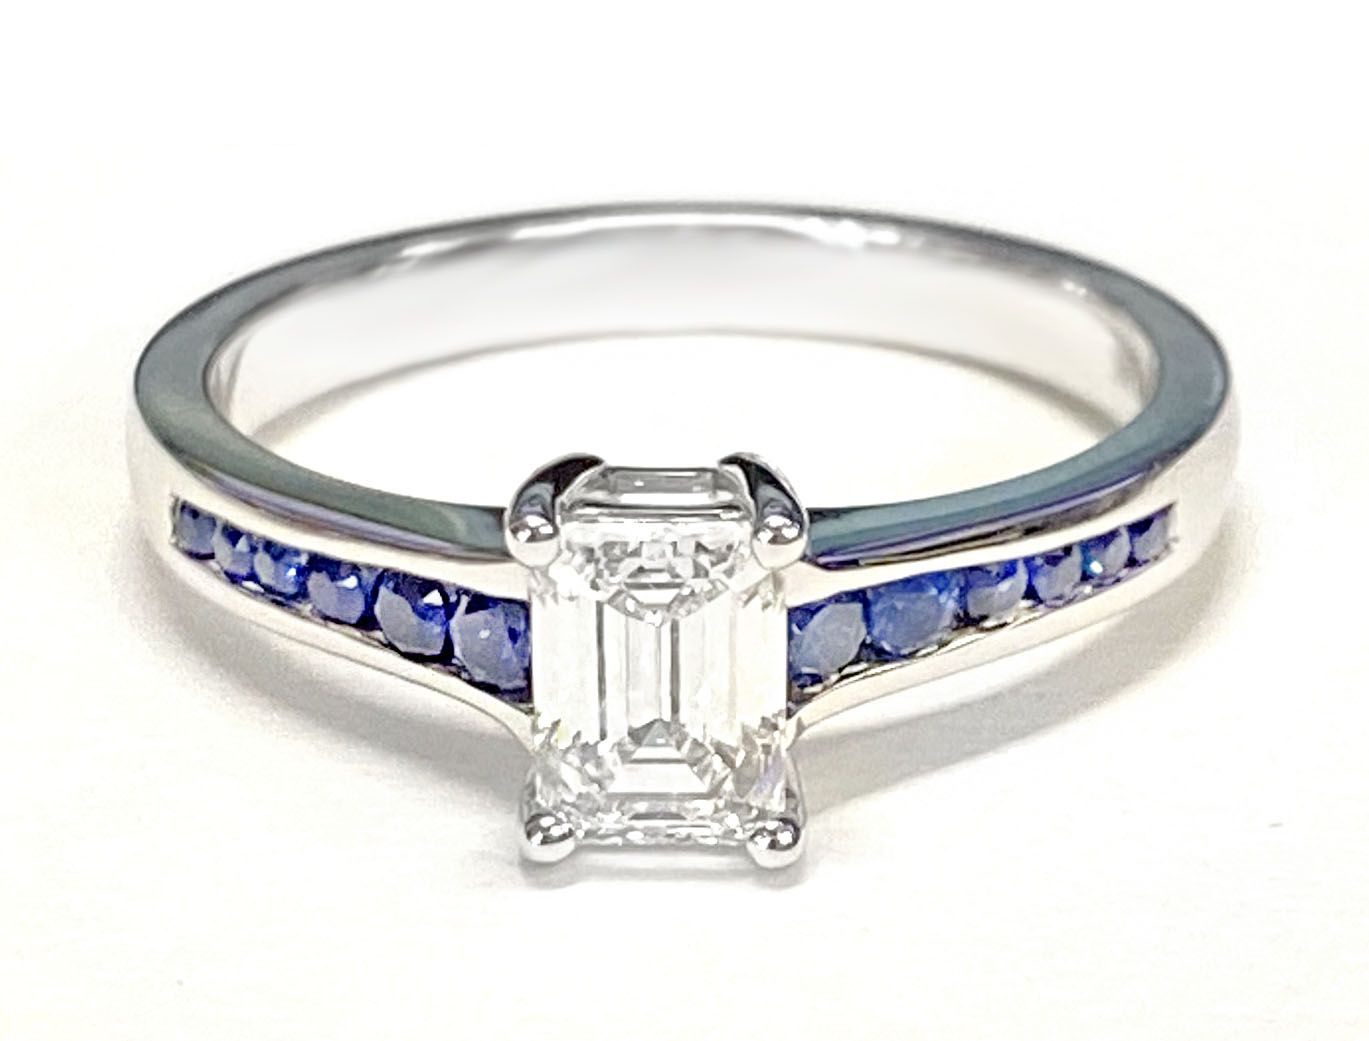 18K White Gold Emerald Cut Contemporary Tapered Blue Sapphire Channel Engagement Ring